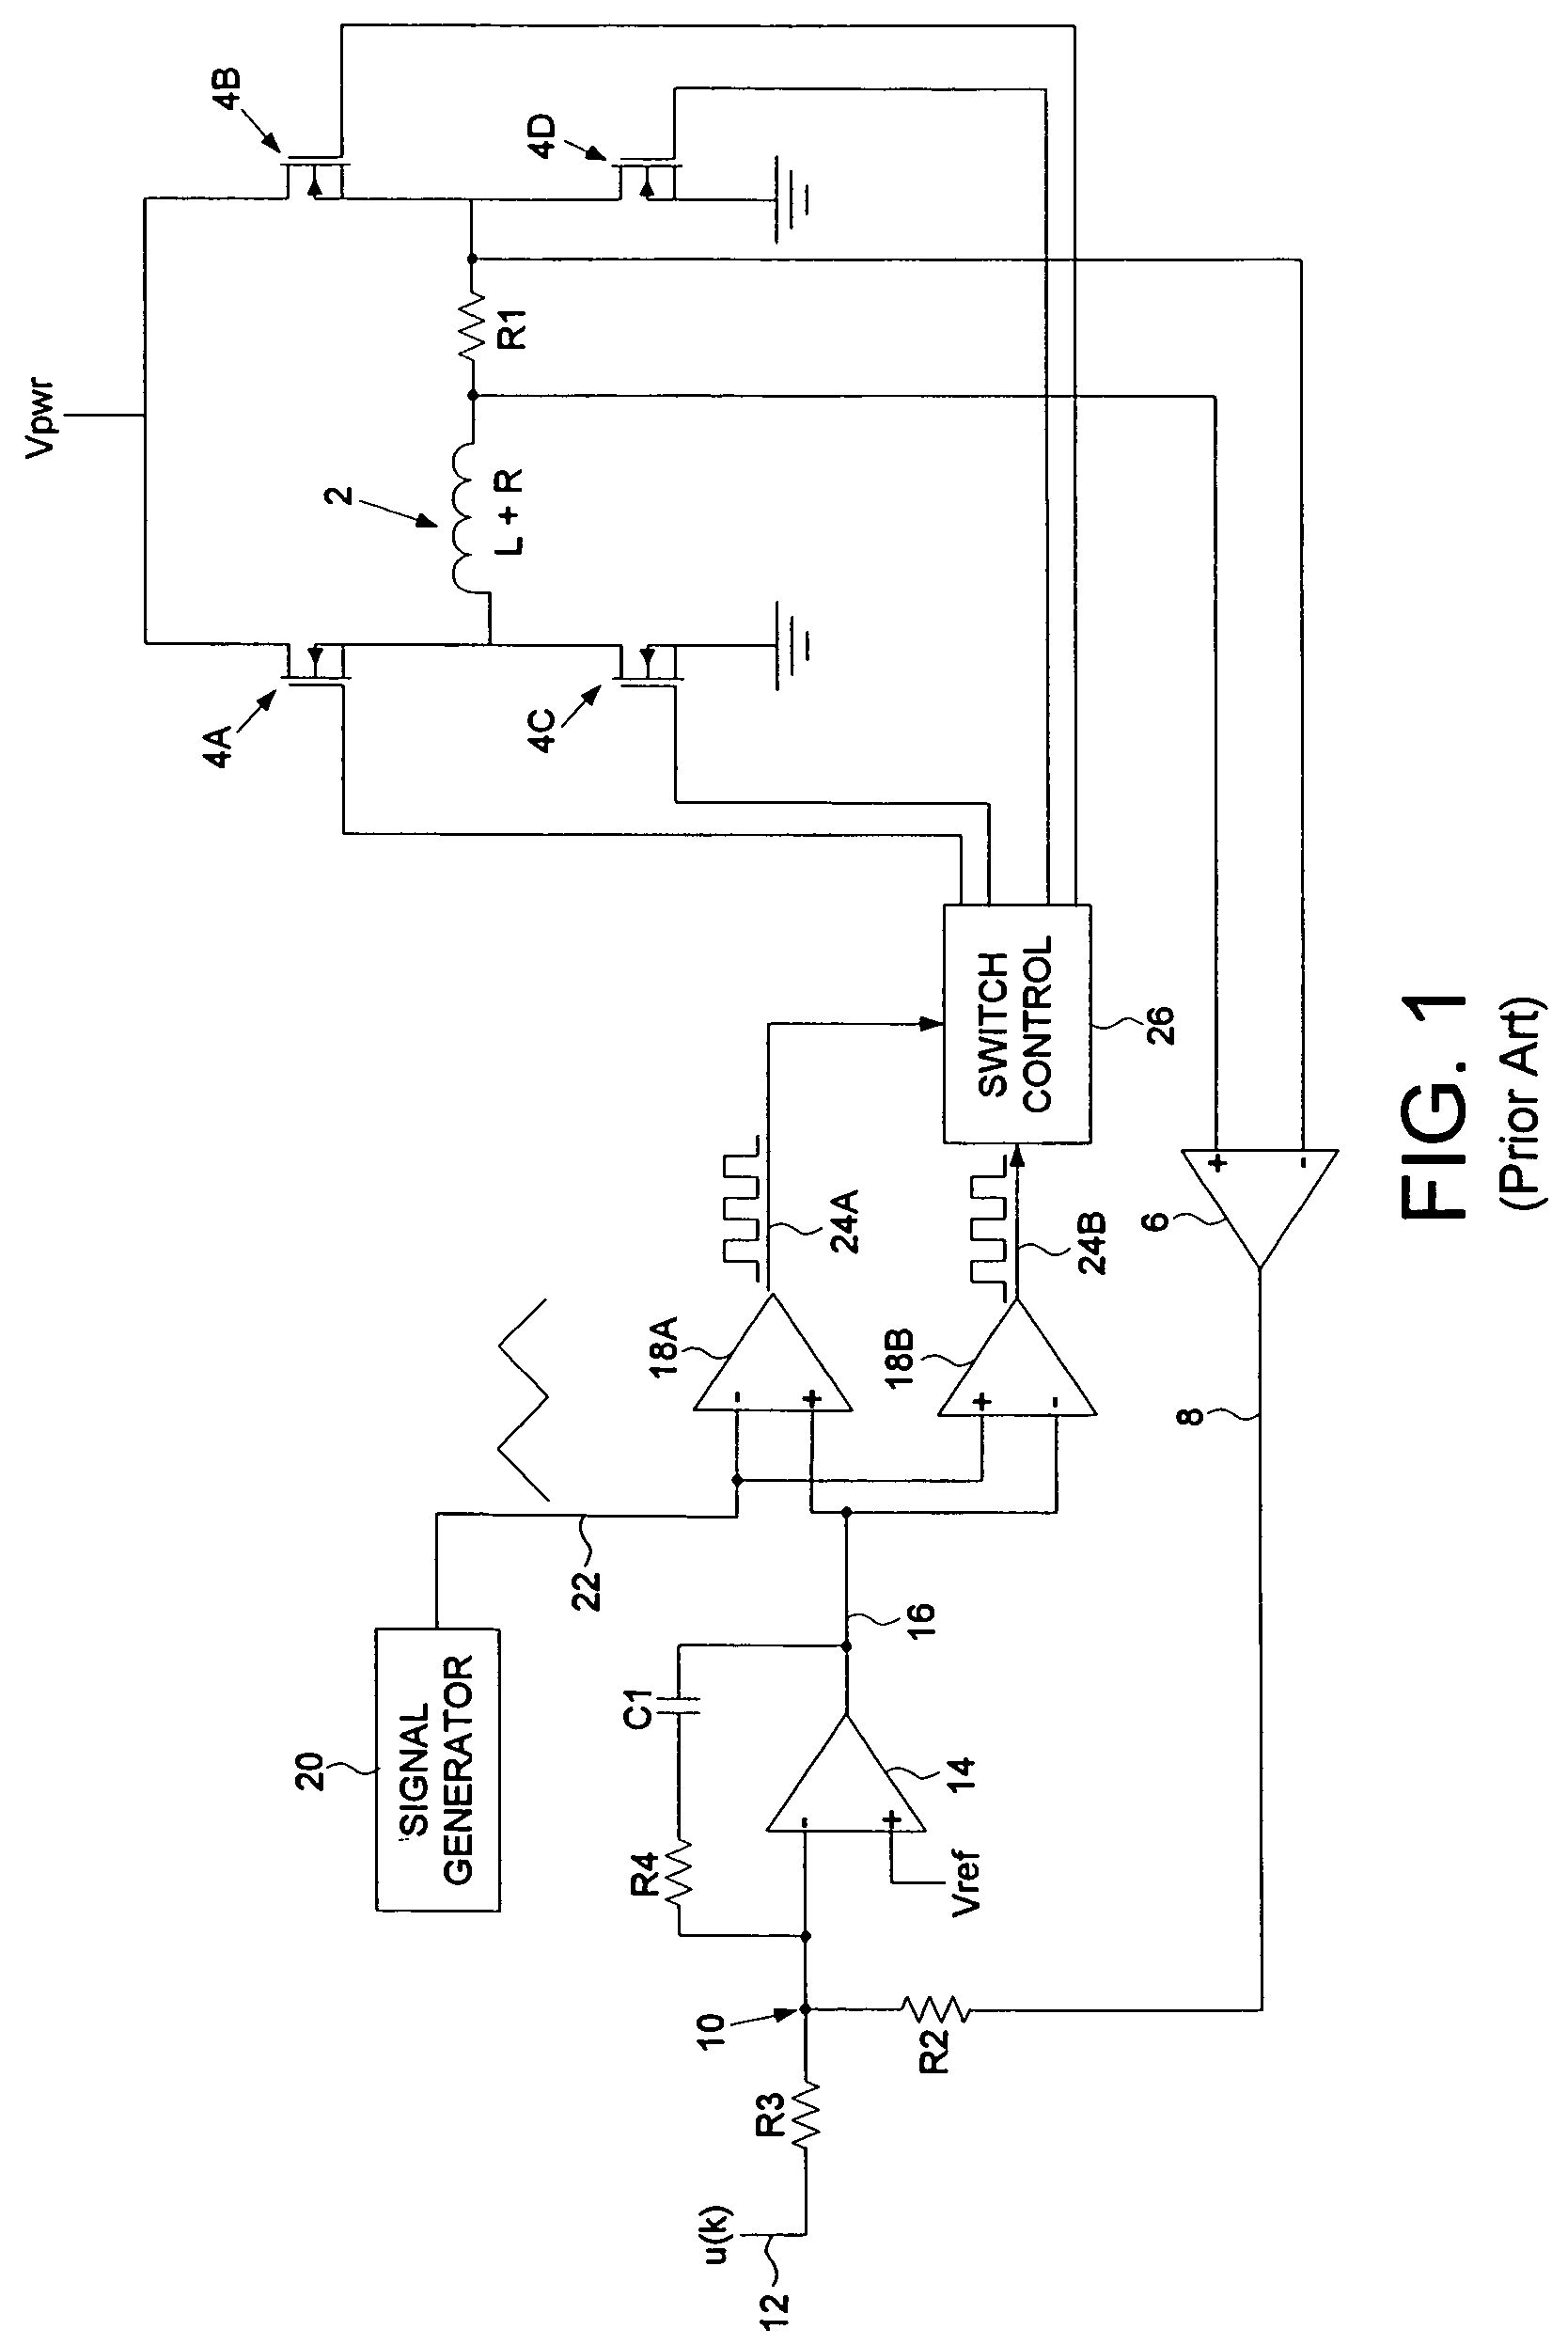 Disk drive pulse width modulating a voice coil motor using model reference current feedback